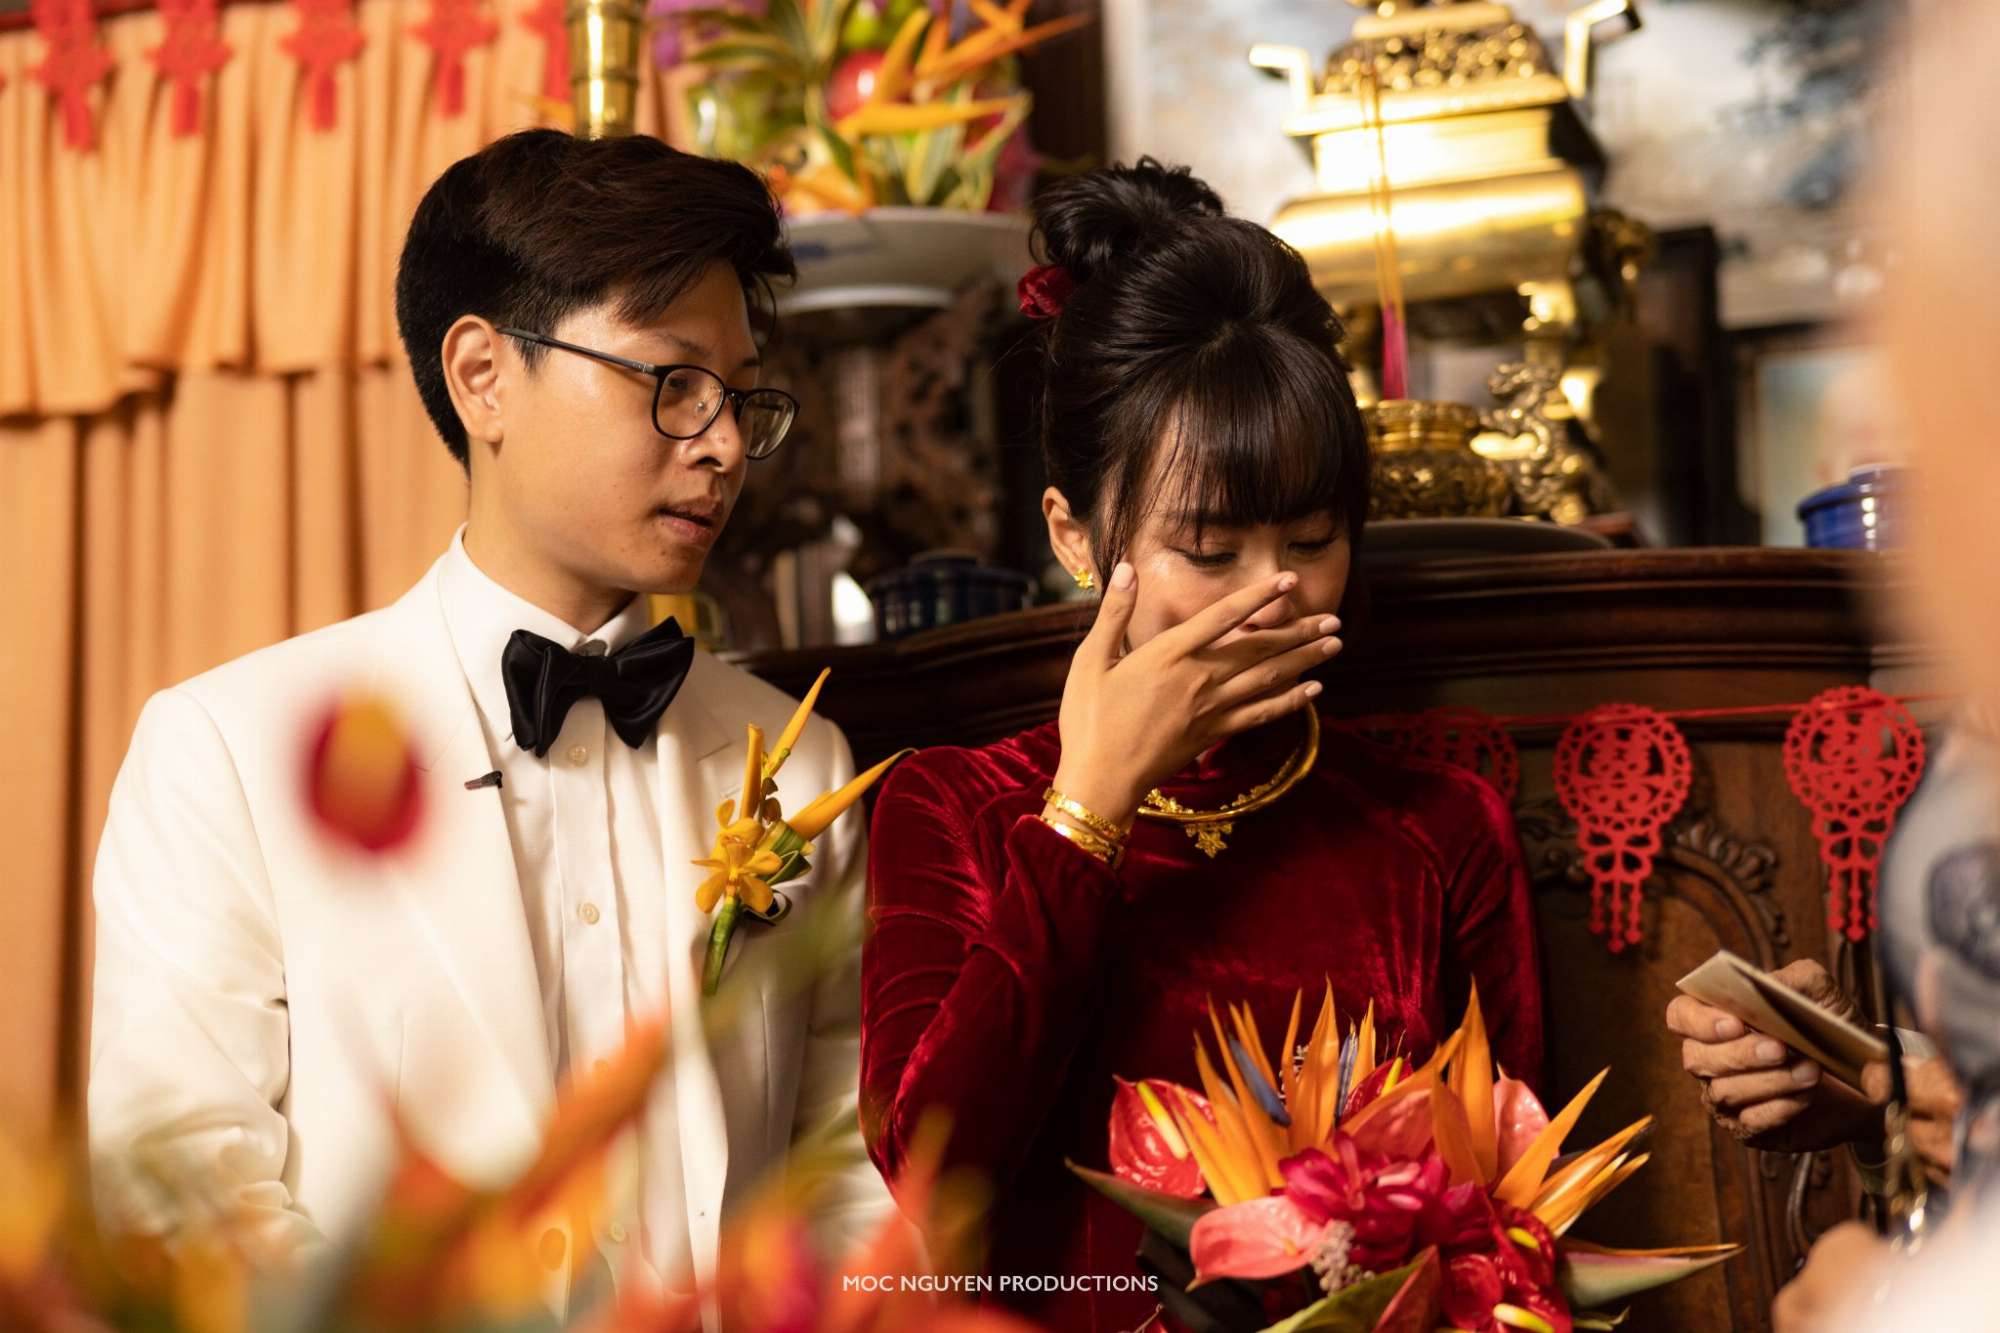 "God of War" Bomman is confused to see the bride crying during the ceremony.